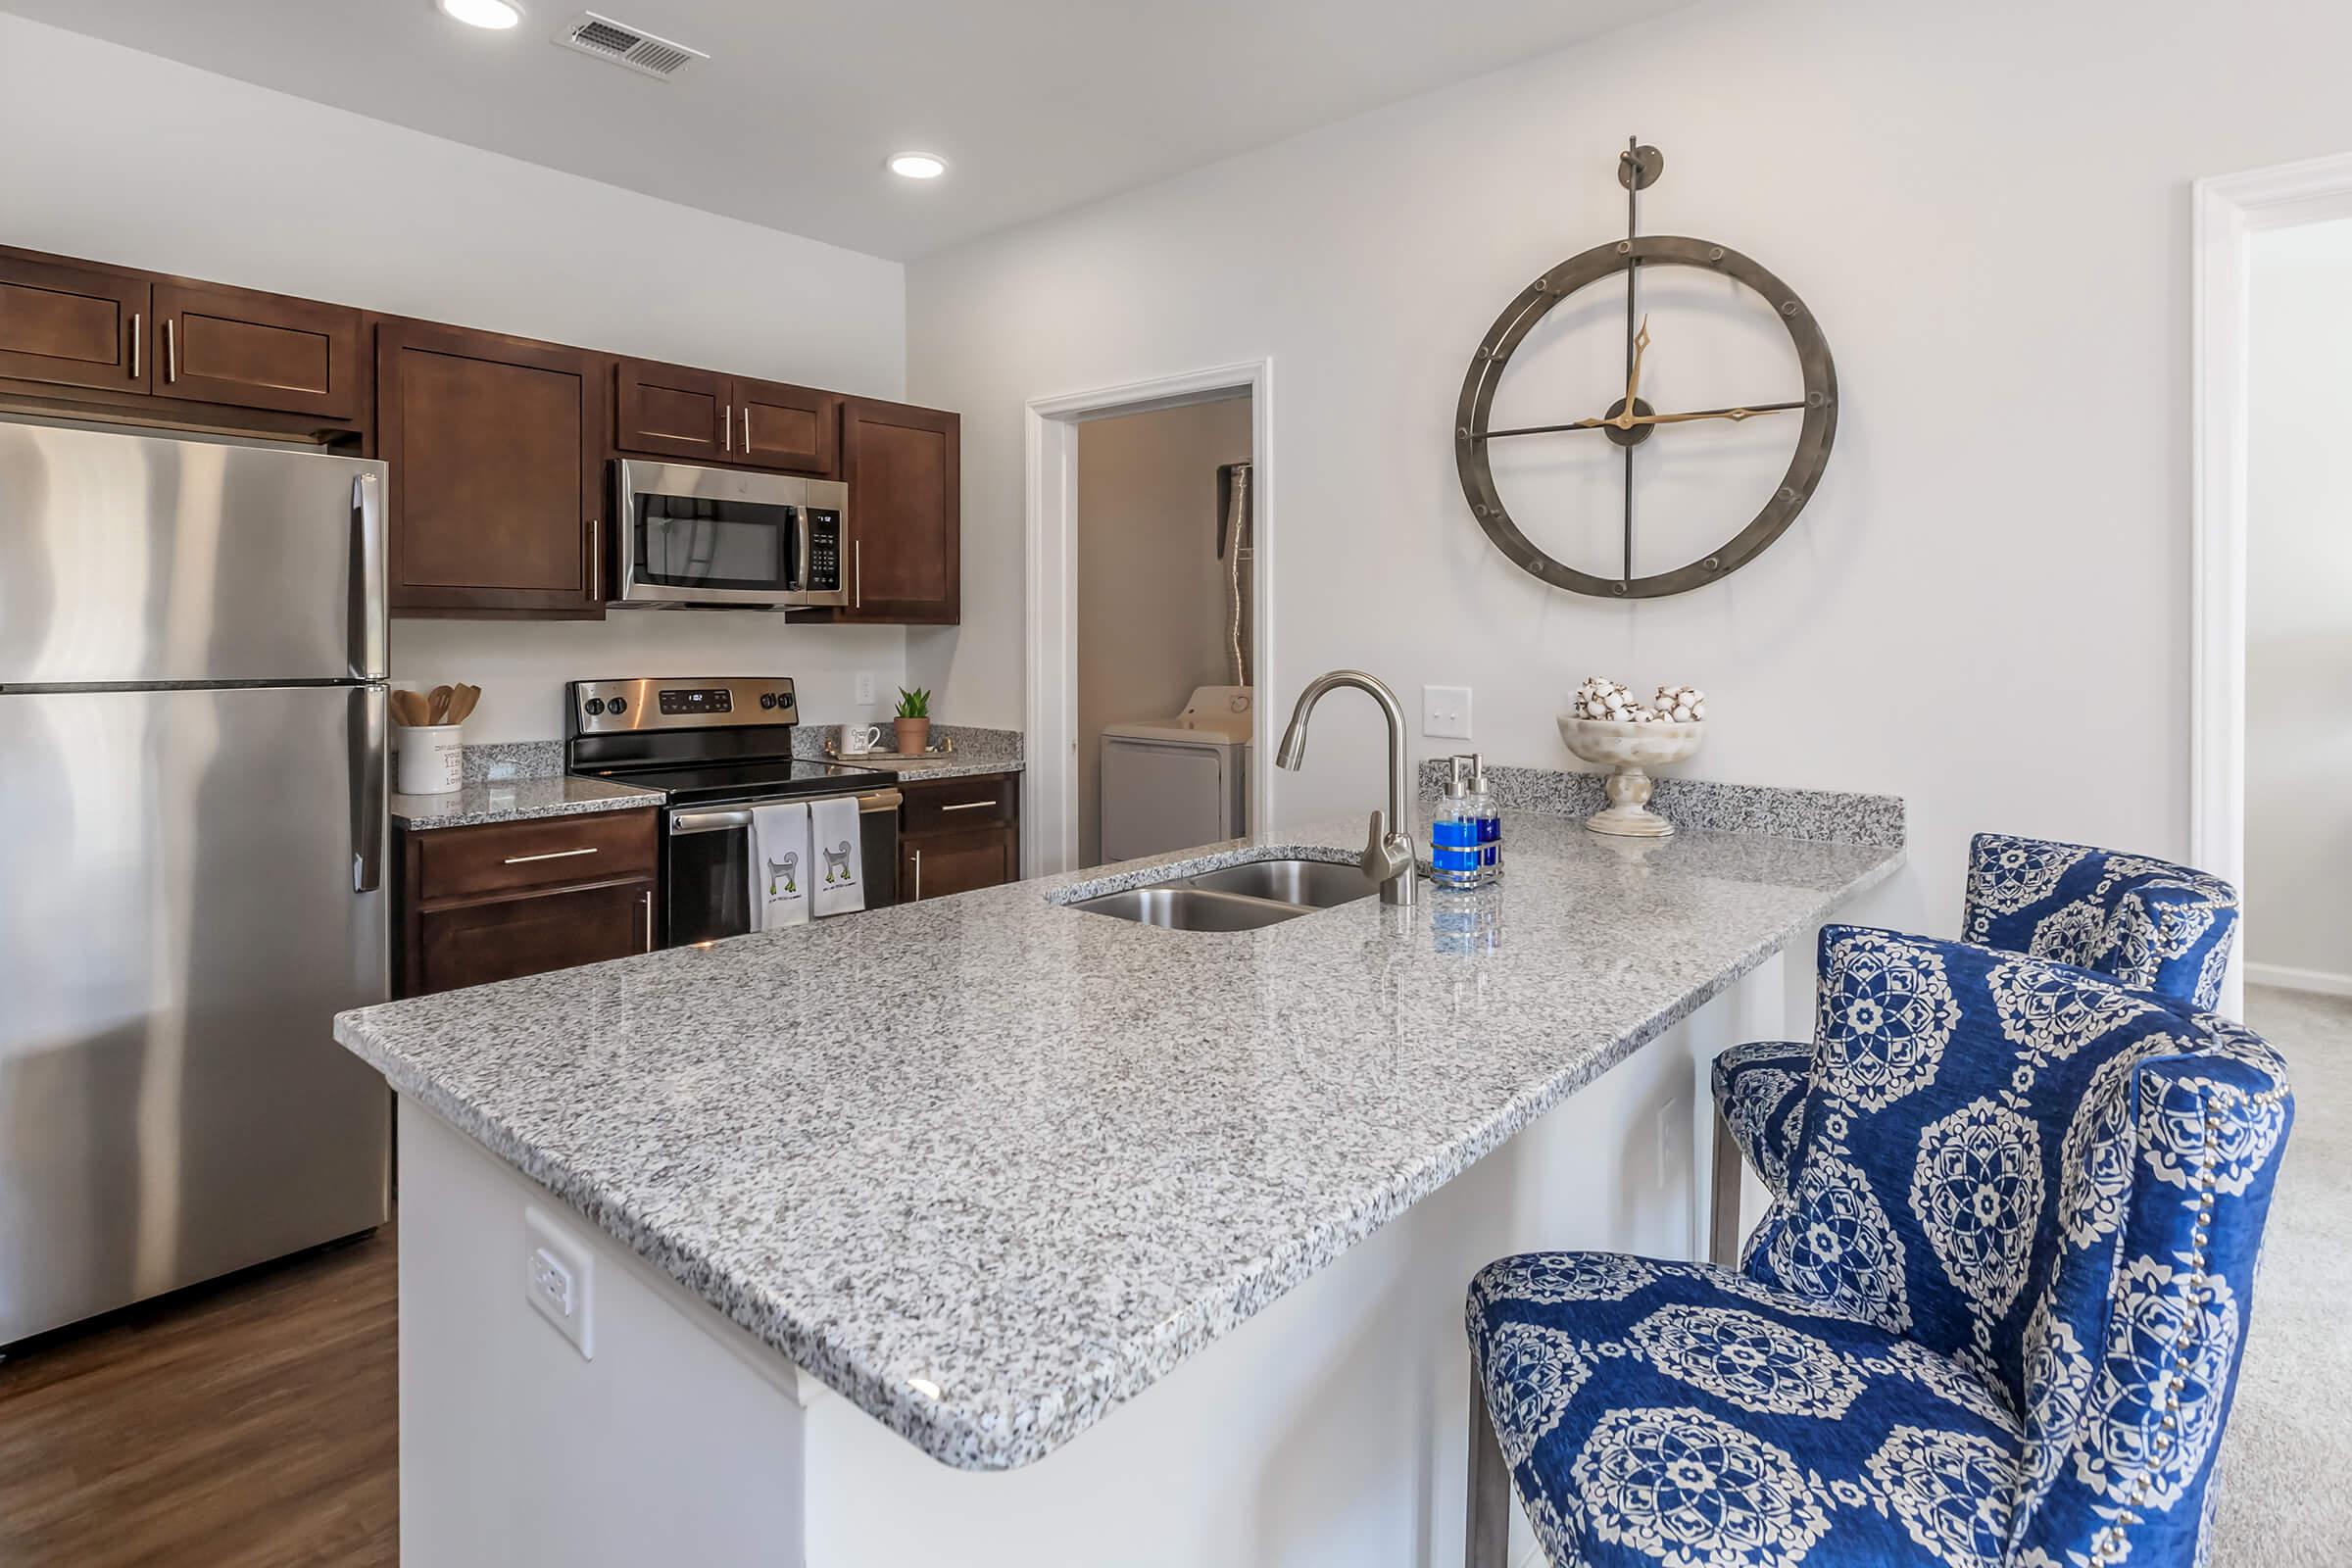 Spacious Kitchens Here At Riverstone Apartments At Long Shoals in Arden, North Carolina